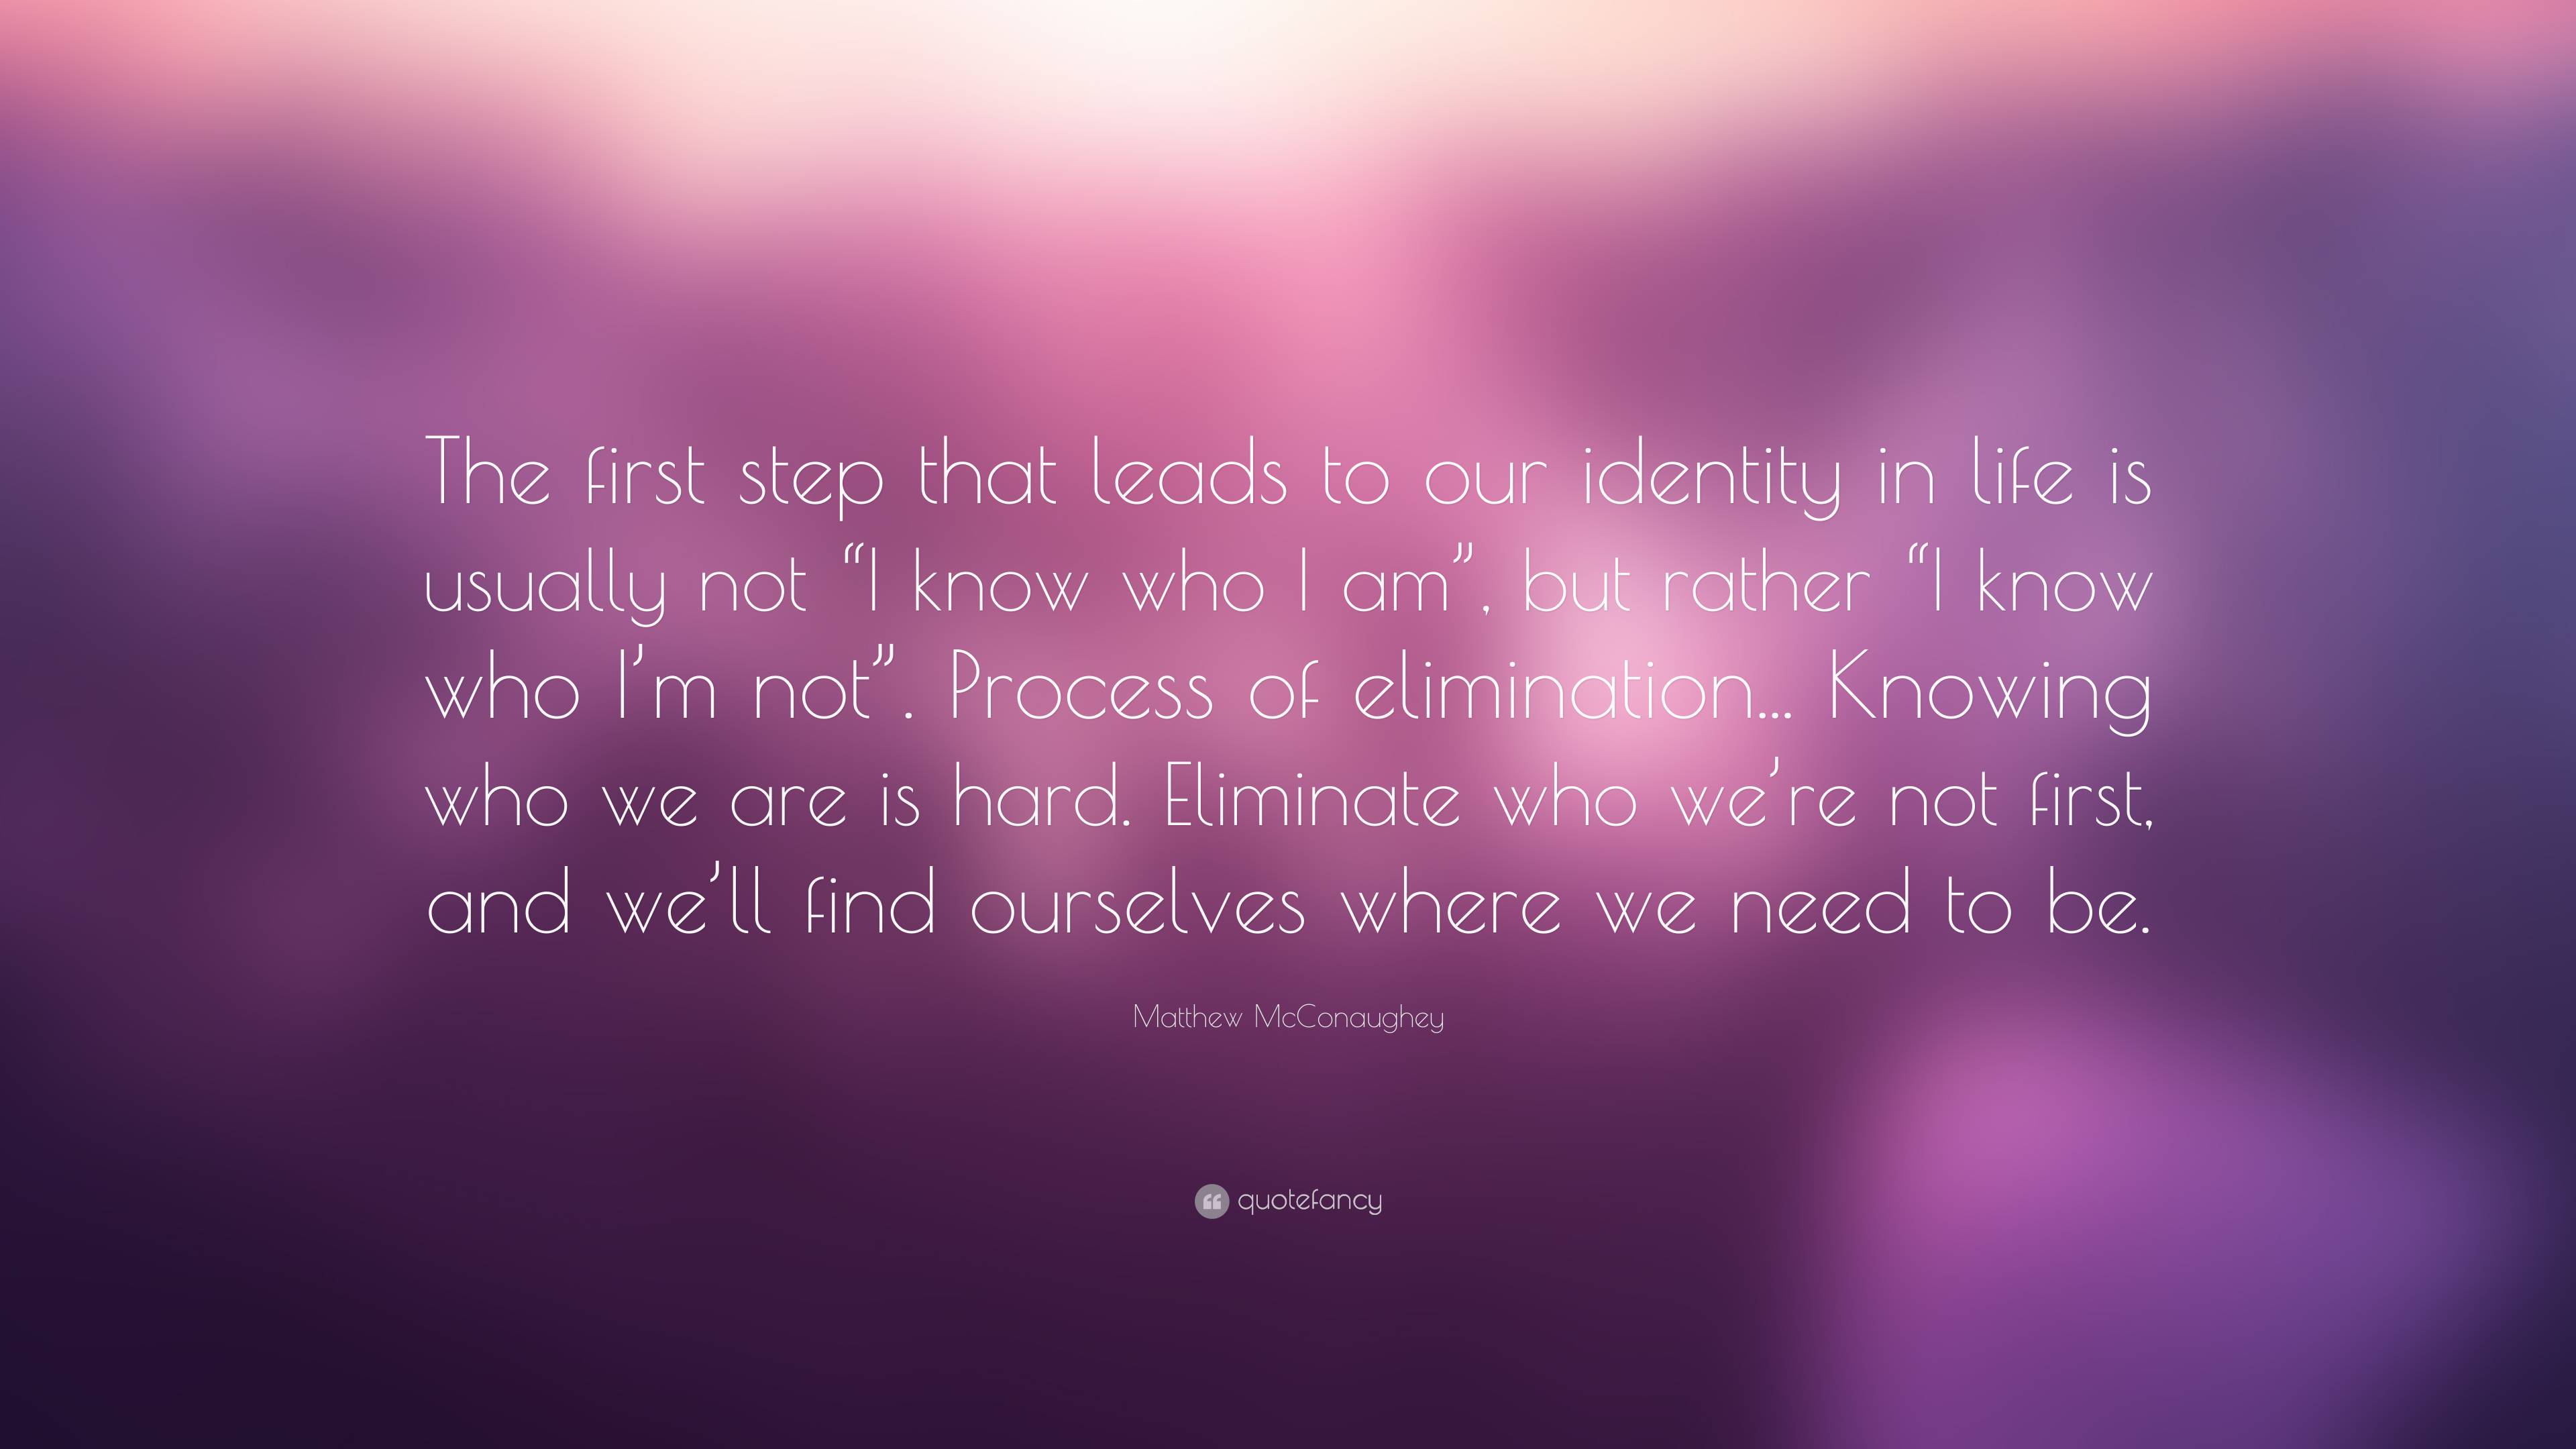 Matthew McConaughey Quote: “The first step that leads to our identity ...